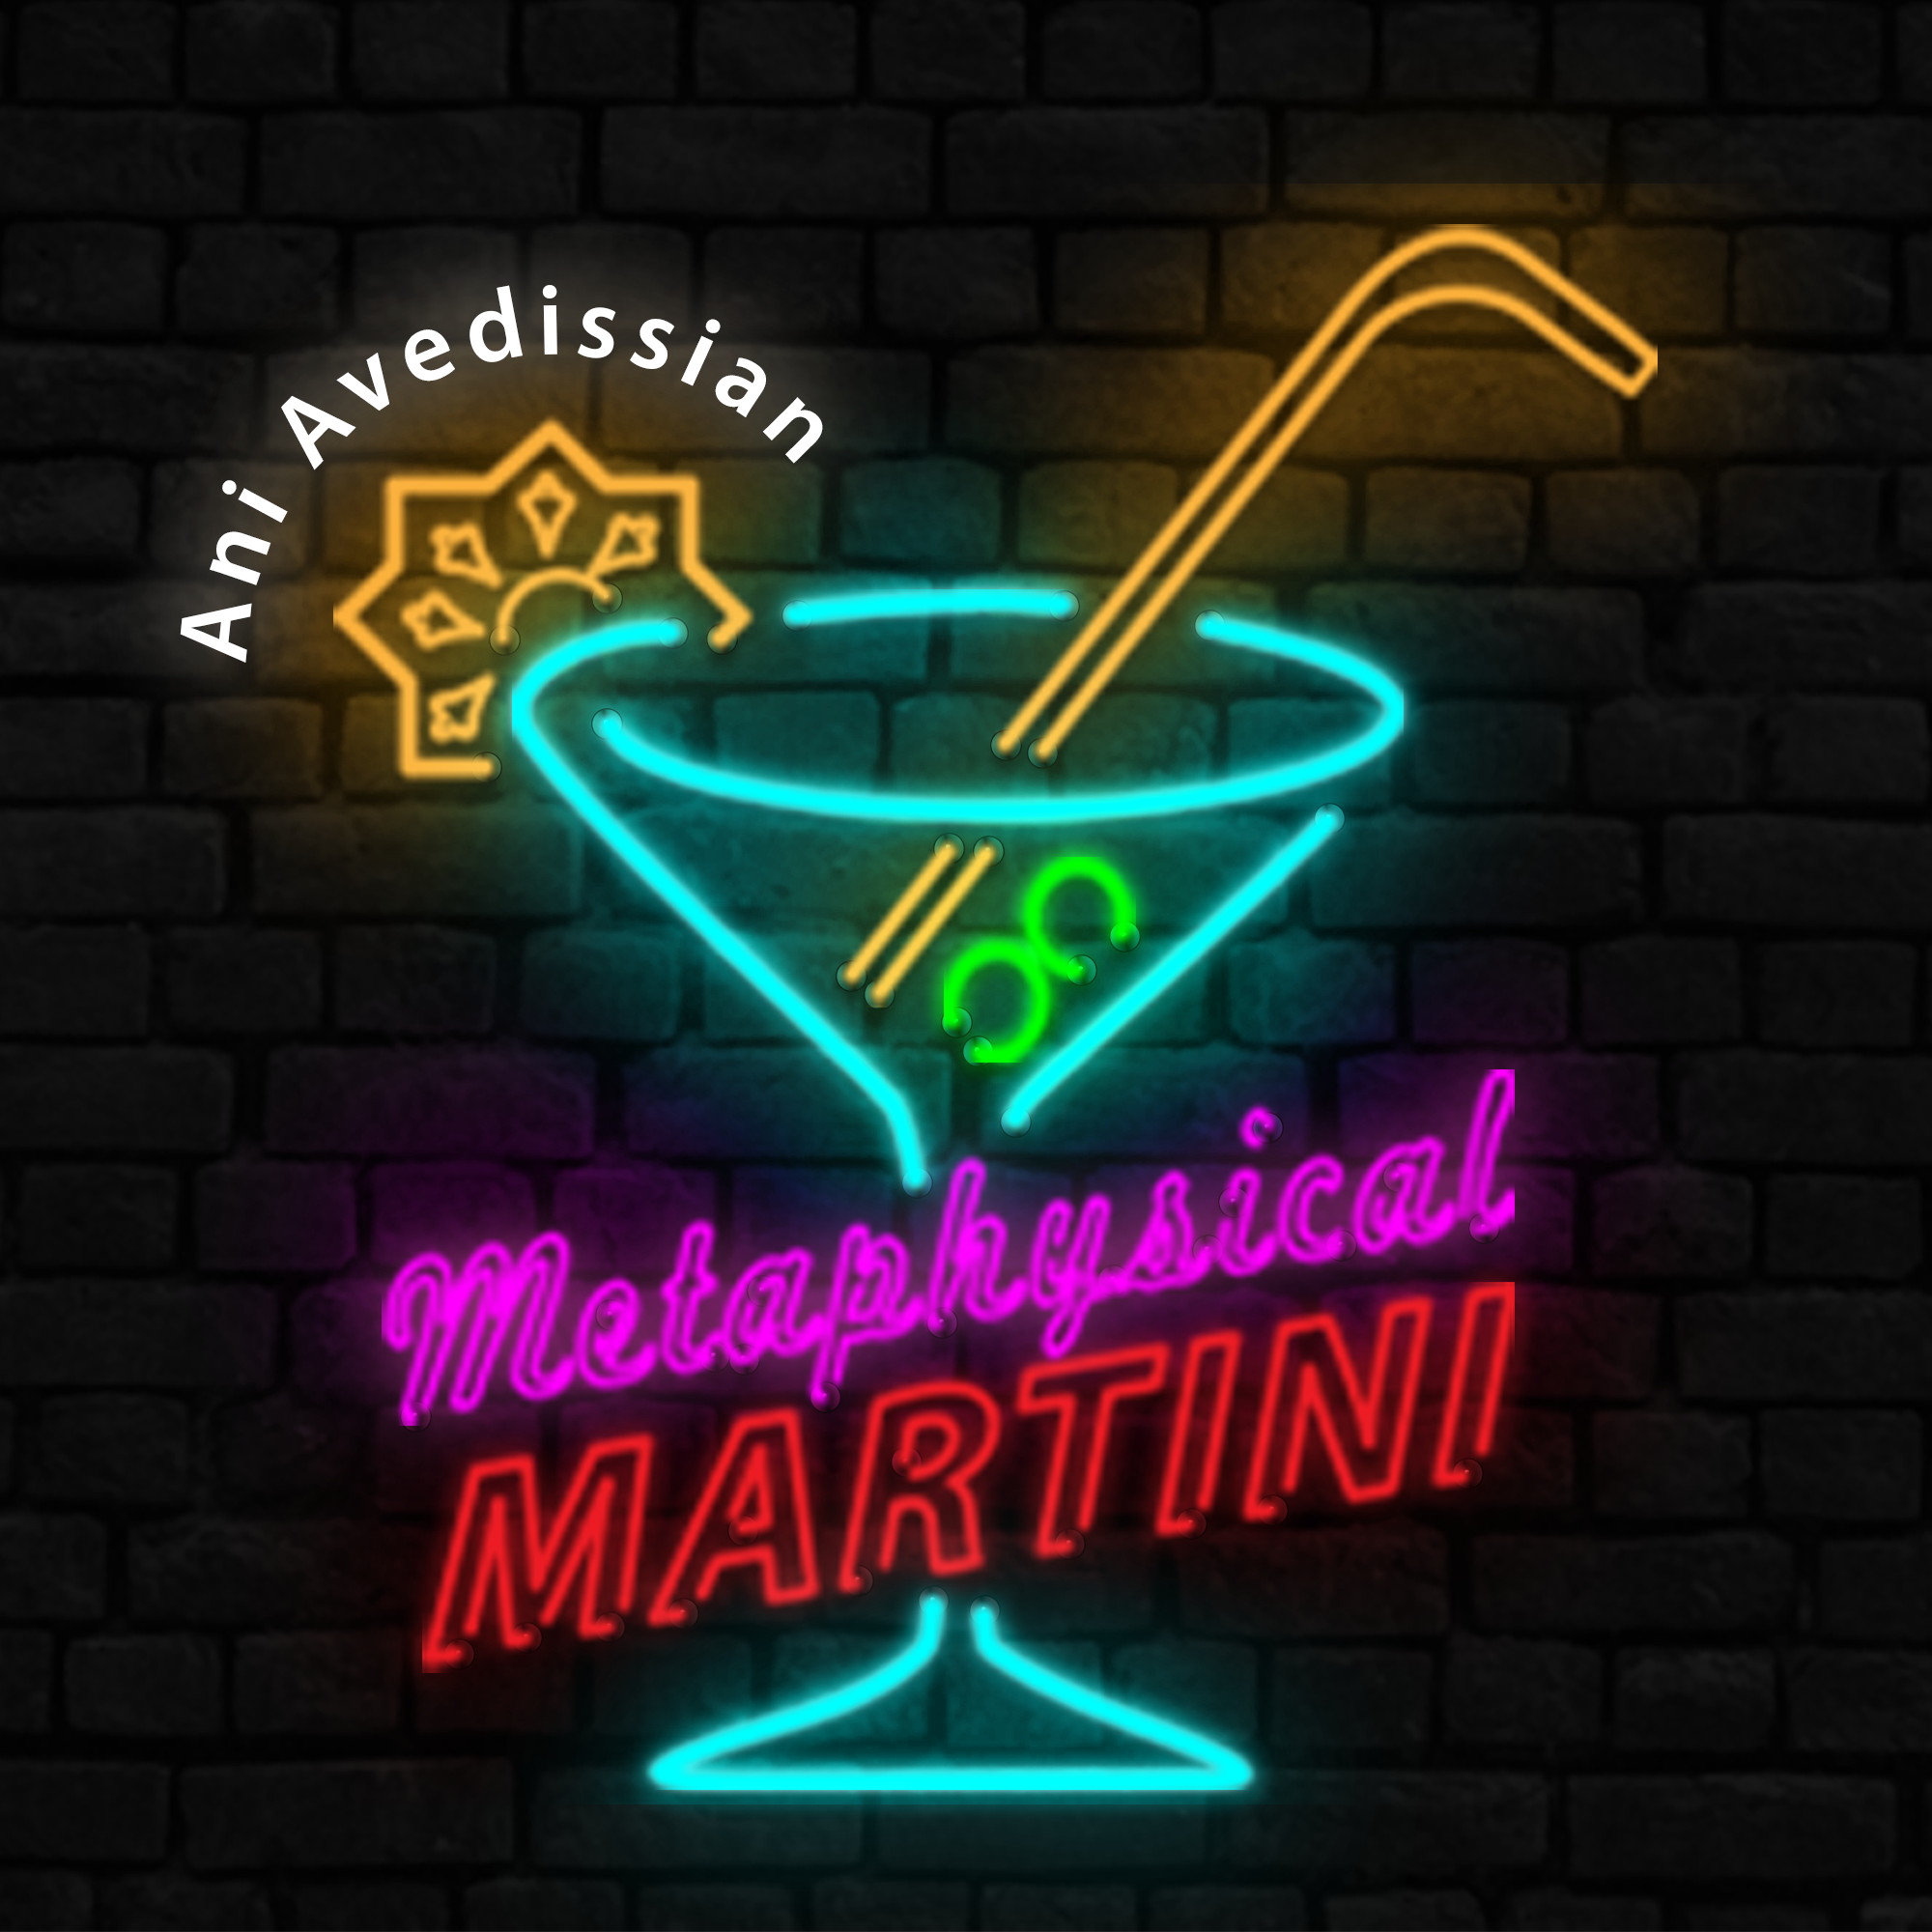 "Metaphysical Martini"  05/27/2020  Awakening can be painful.  But the experience is gainful!